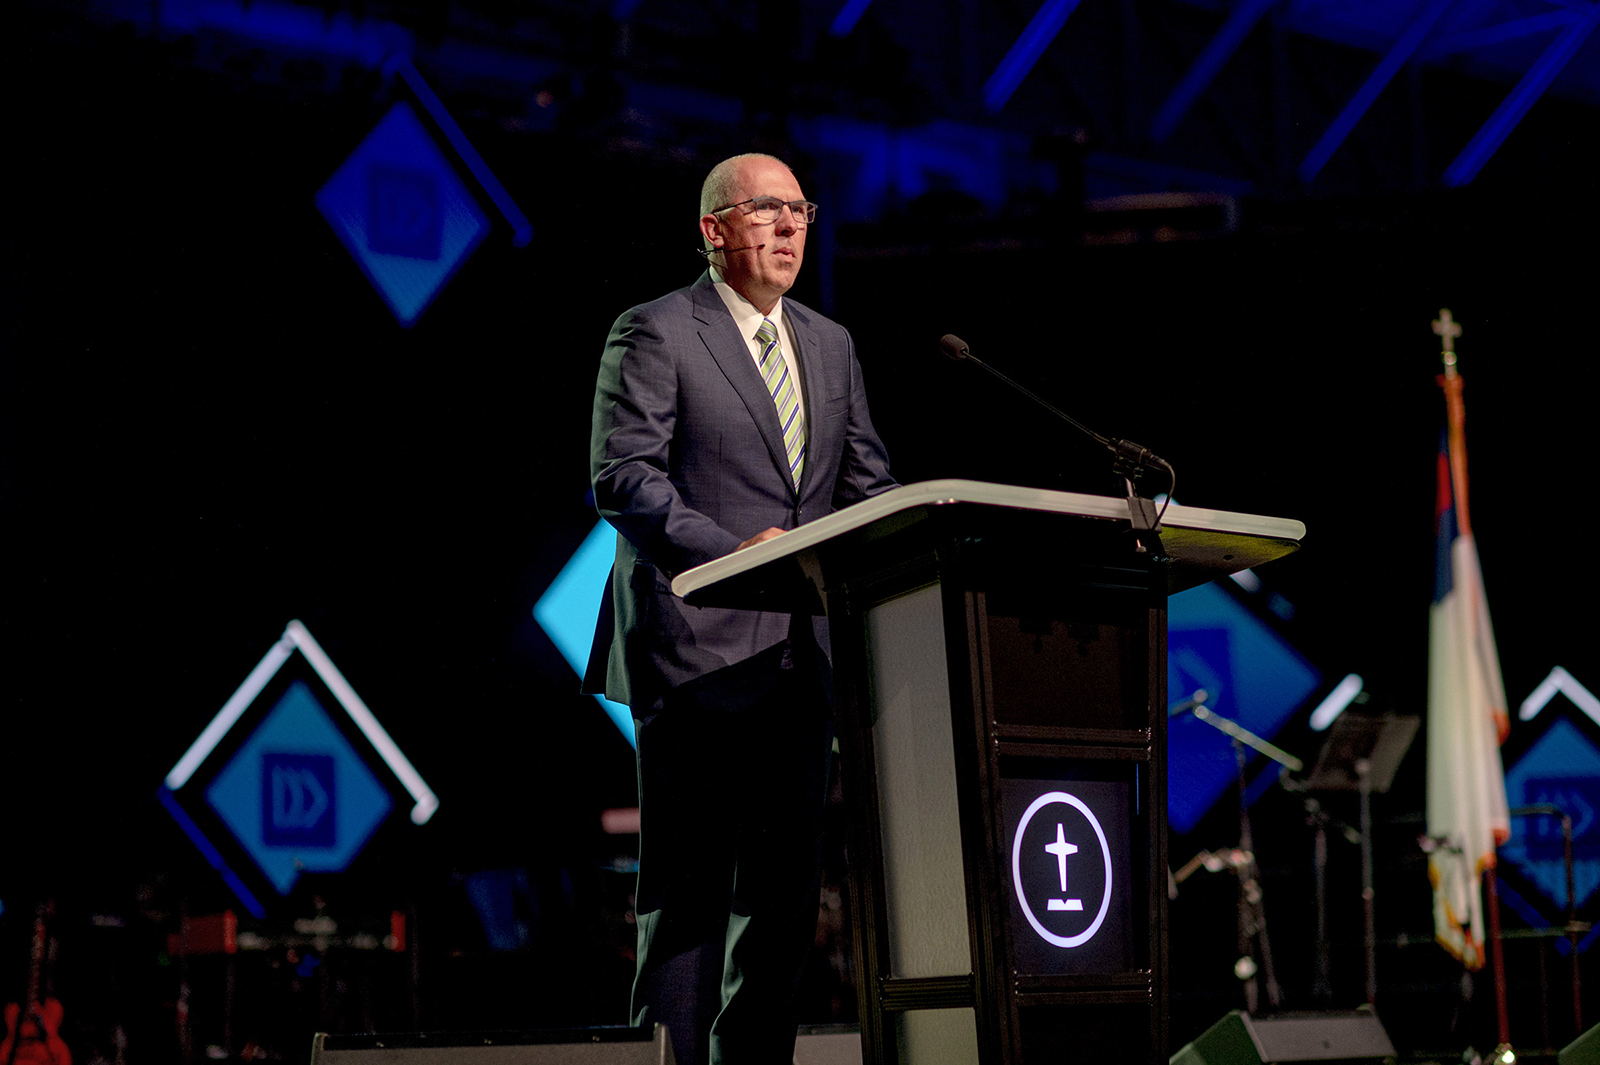 Southern Baptist Convention president Bart Barber speaks during the first day of the SBC annual meeting at the Ernest N. Morial Convention Center in New Orleans, La., on June 13, 2023. RNS photo by Emily Kask